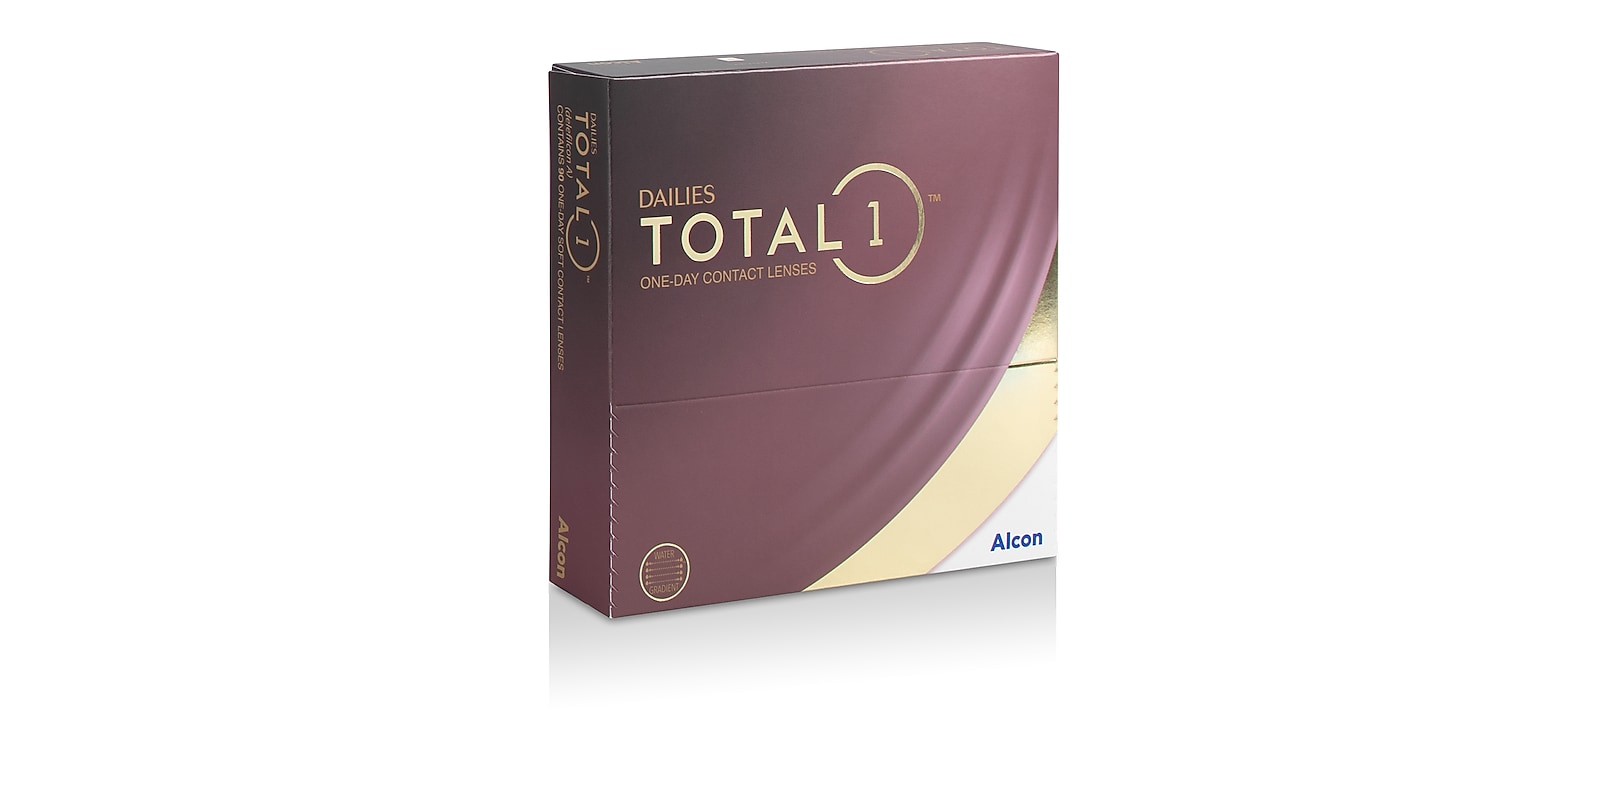 DAILIES TOTAL1®, 90 pack contact lenses